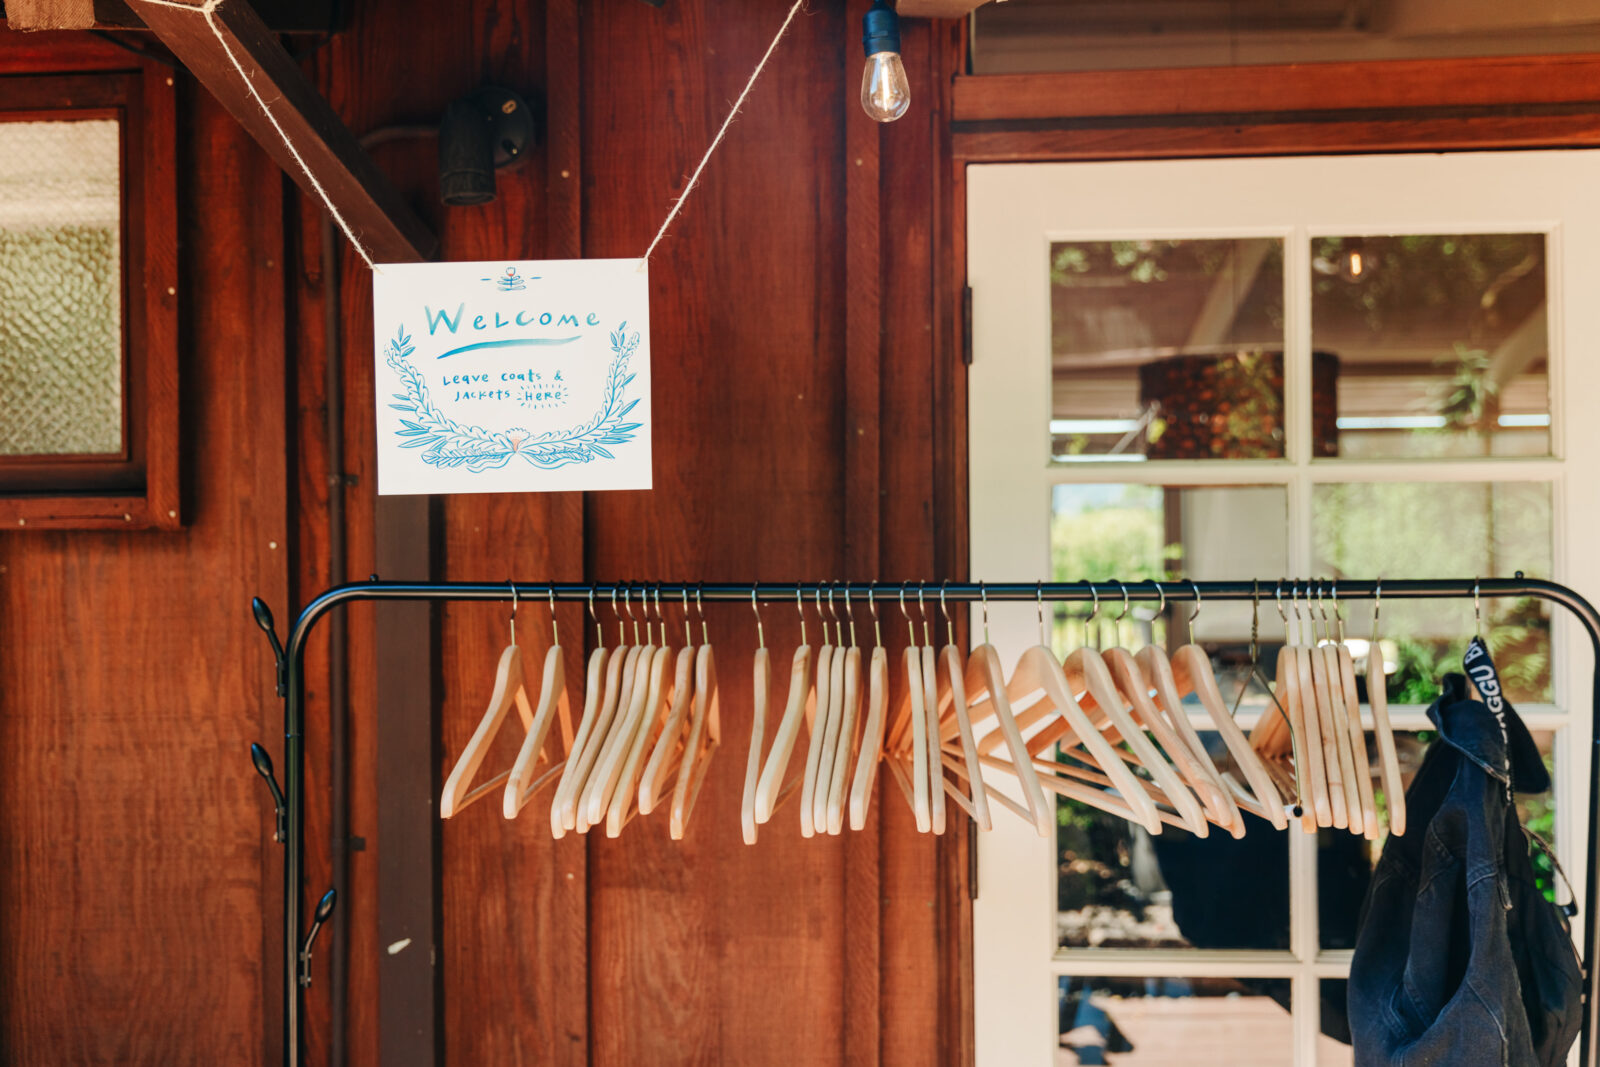 A handmade sign welcomes guests and asks them to leave their jackets on a coat rack